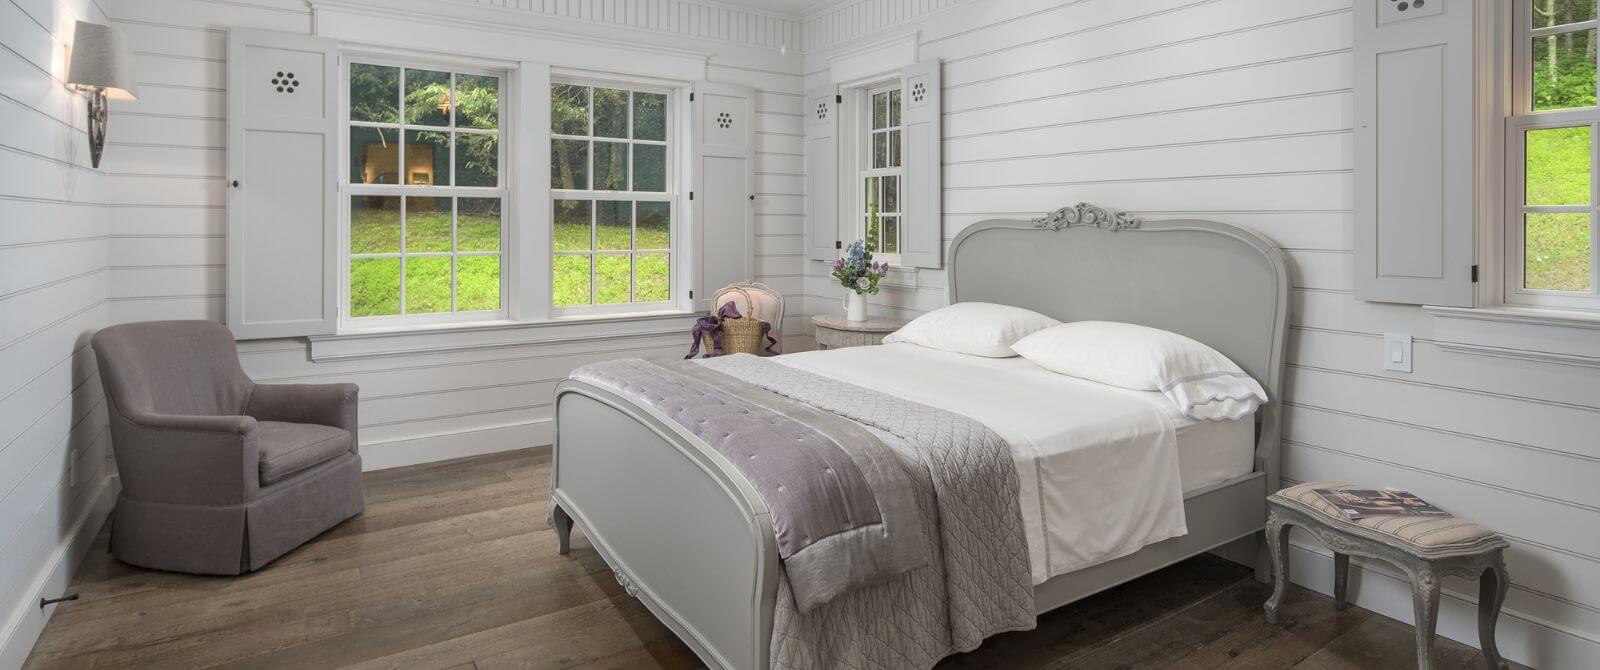 Bright and spacious bedroom with queen bed, sitting chairs, and large windows overlooking a green yard